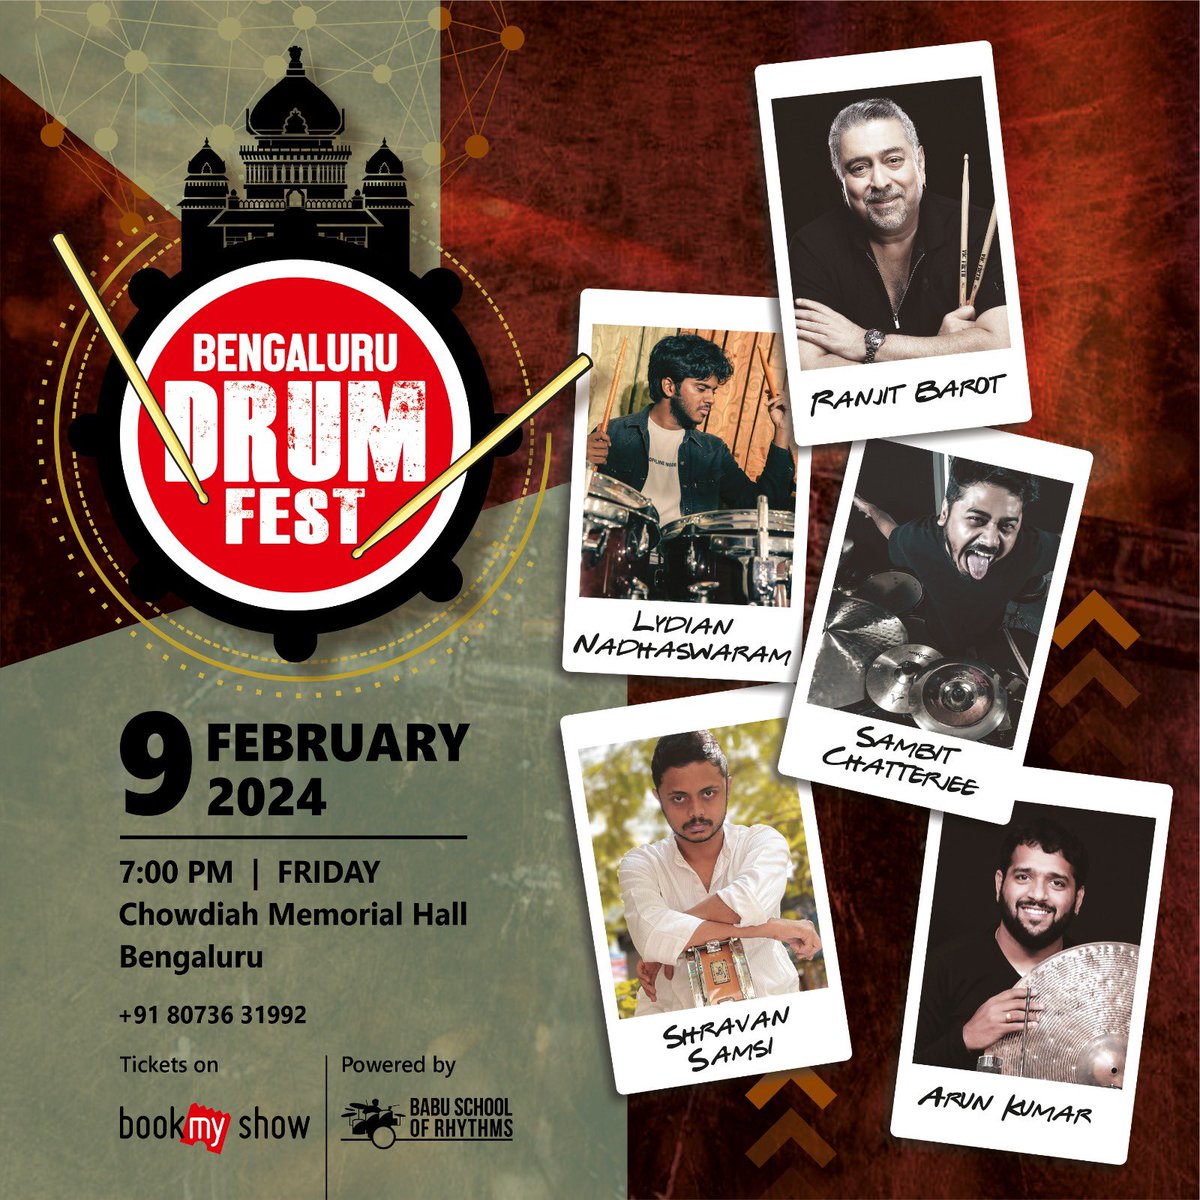 Announcing the phenomenal drummers of Bengaluru Drum Fest - BDF2024!! We are now live for tickets bookings on @bookmyshow!! Book your tickets and share other drum aspirants to witness the Legends performing along with other special performances! #drums #drummers #bsor